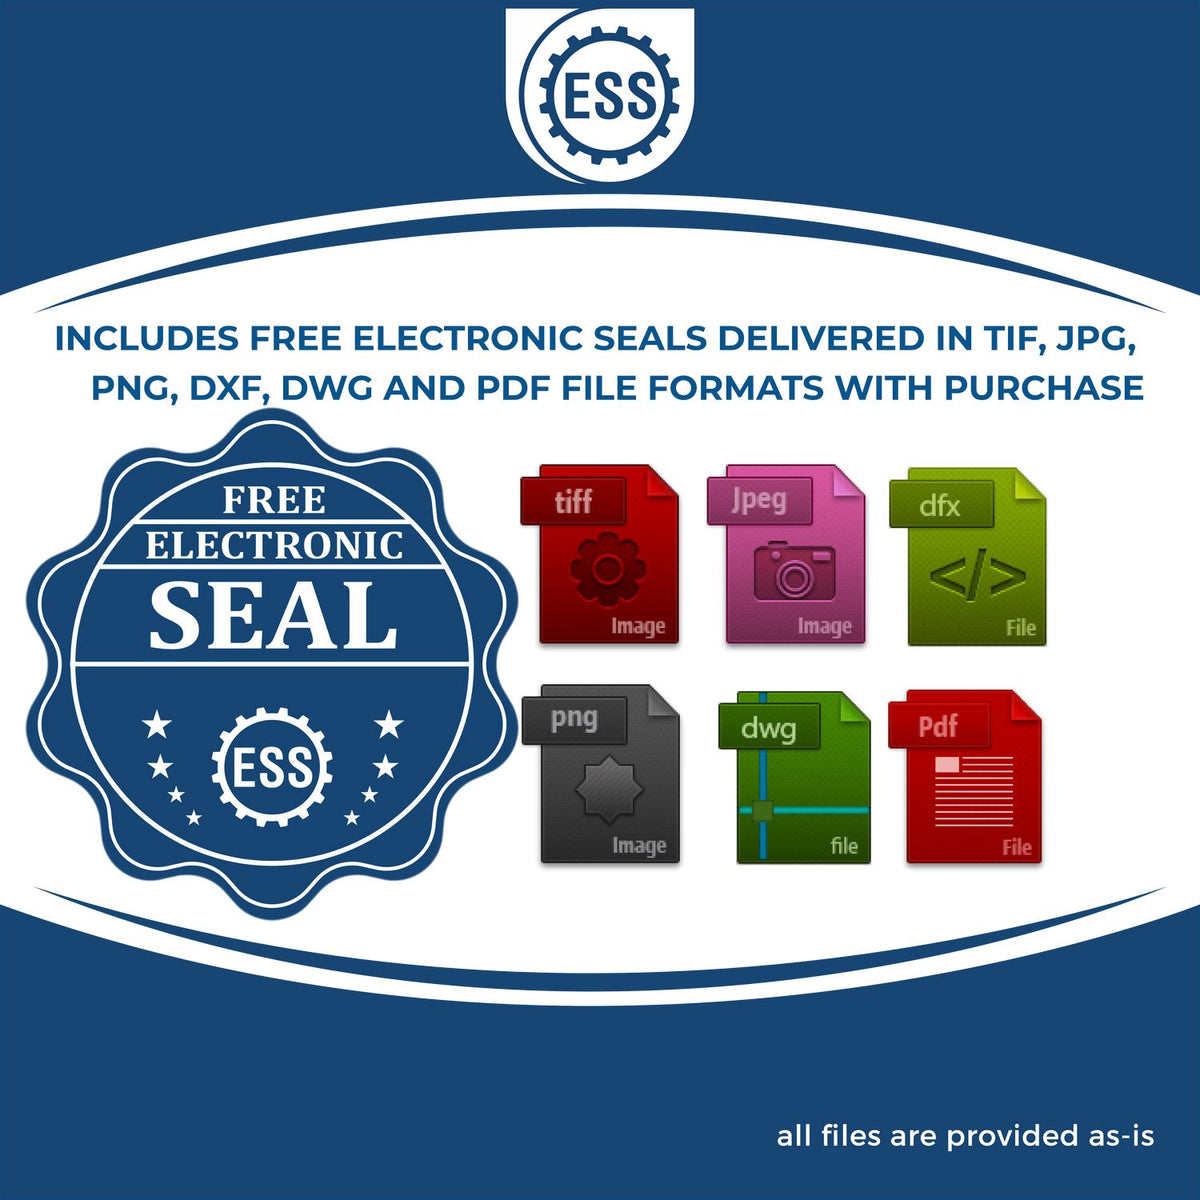 An infographic for the free electronic seal for the Self-Inking North Dakota Geologist Stamp illustrating the different file type icons such as DXF, DWG, TIF, JPG and PNG.